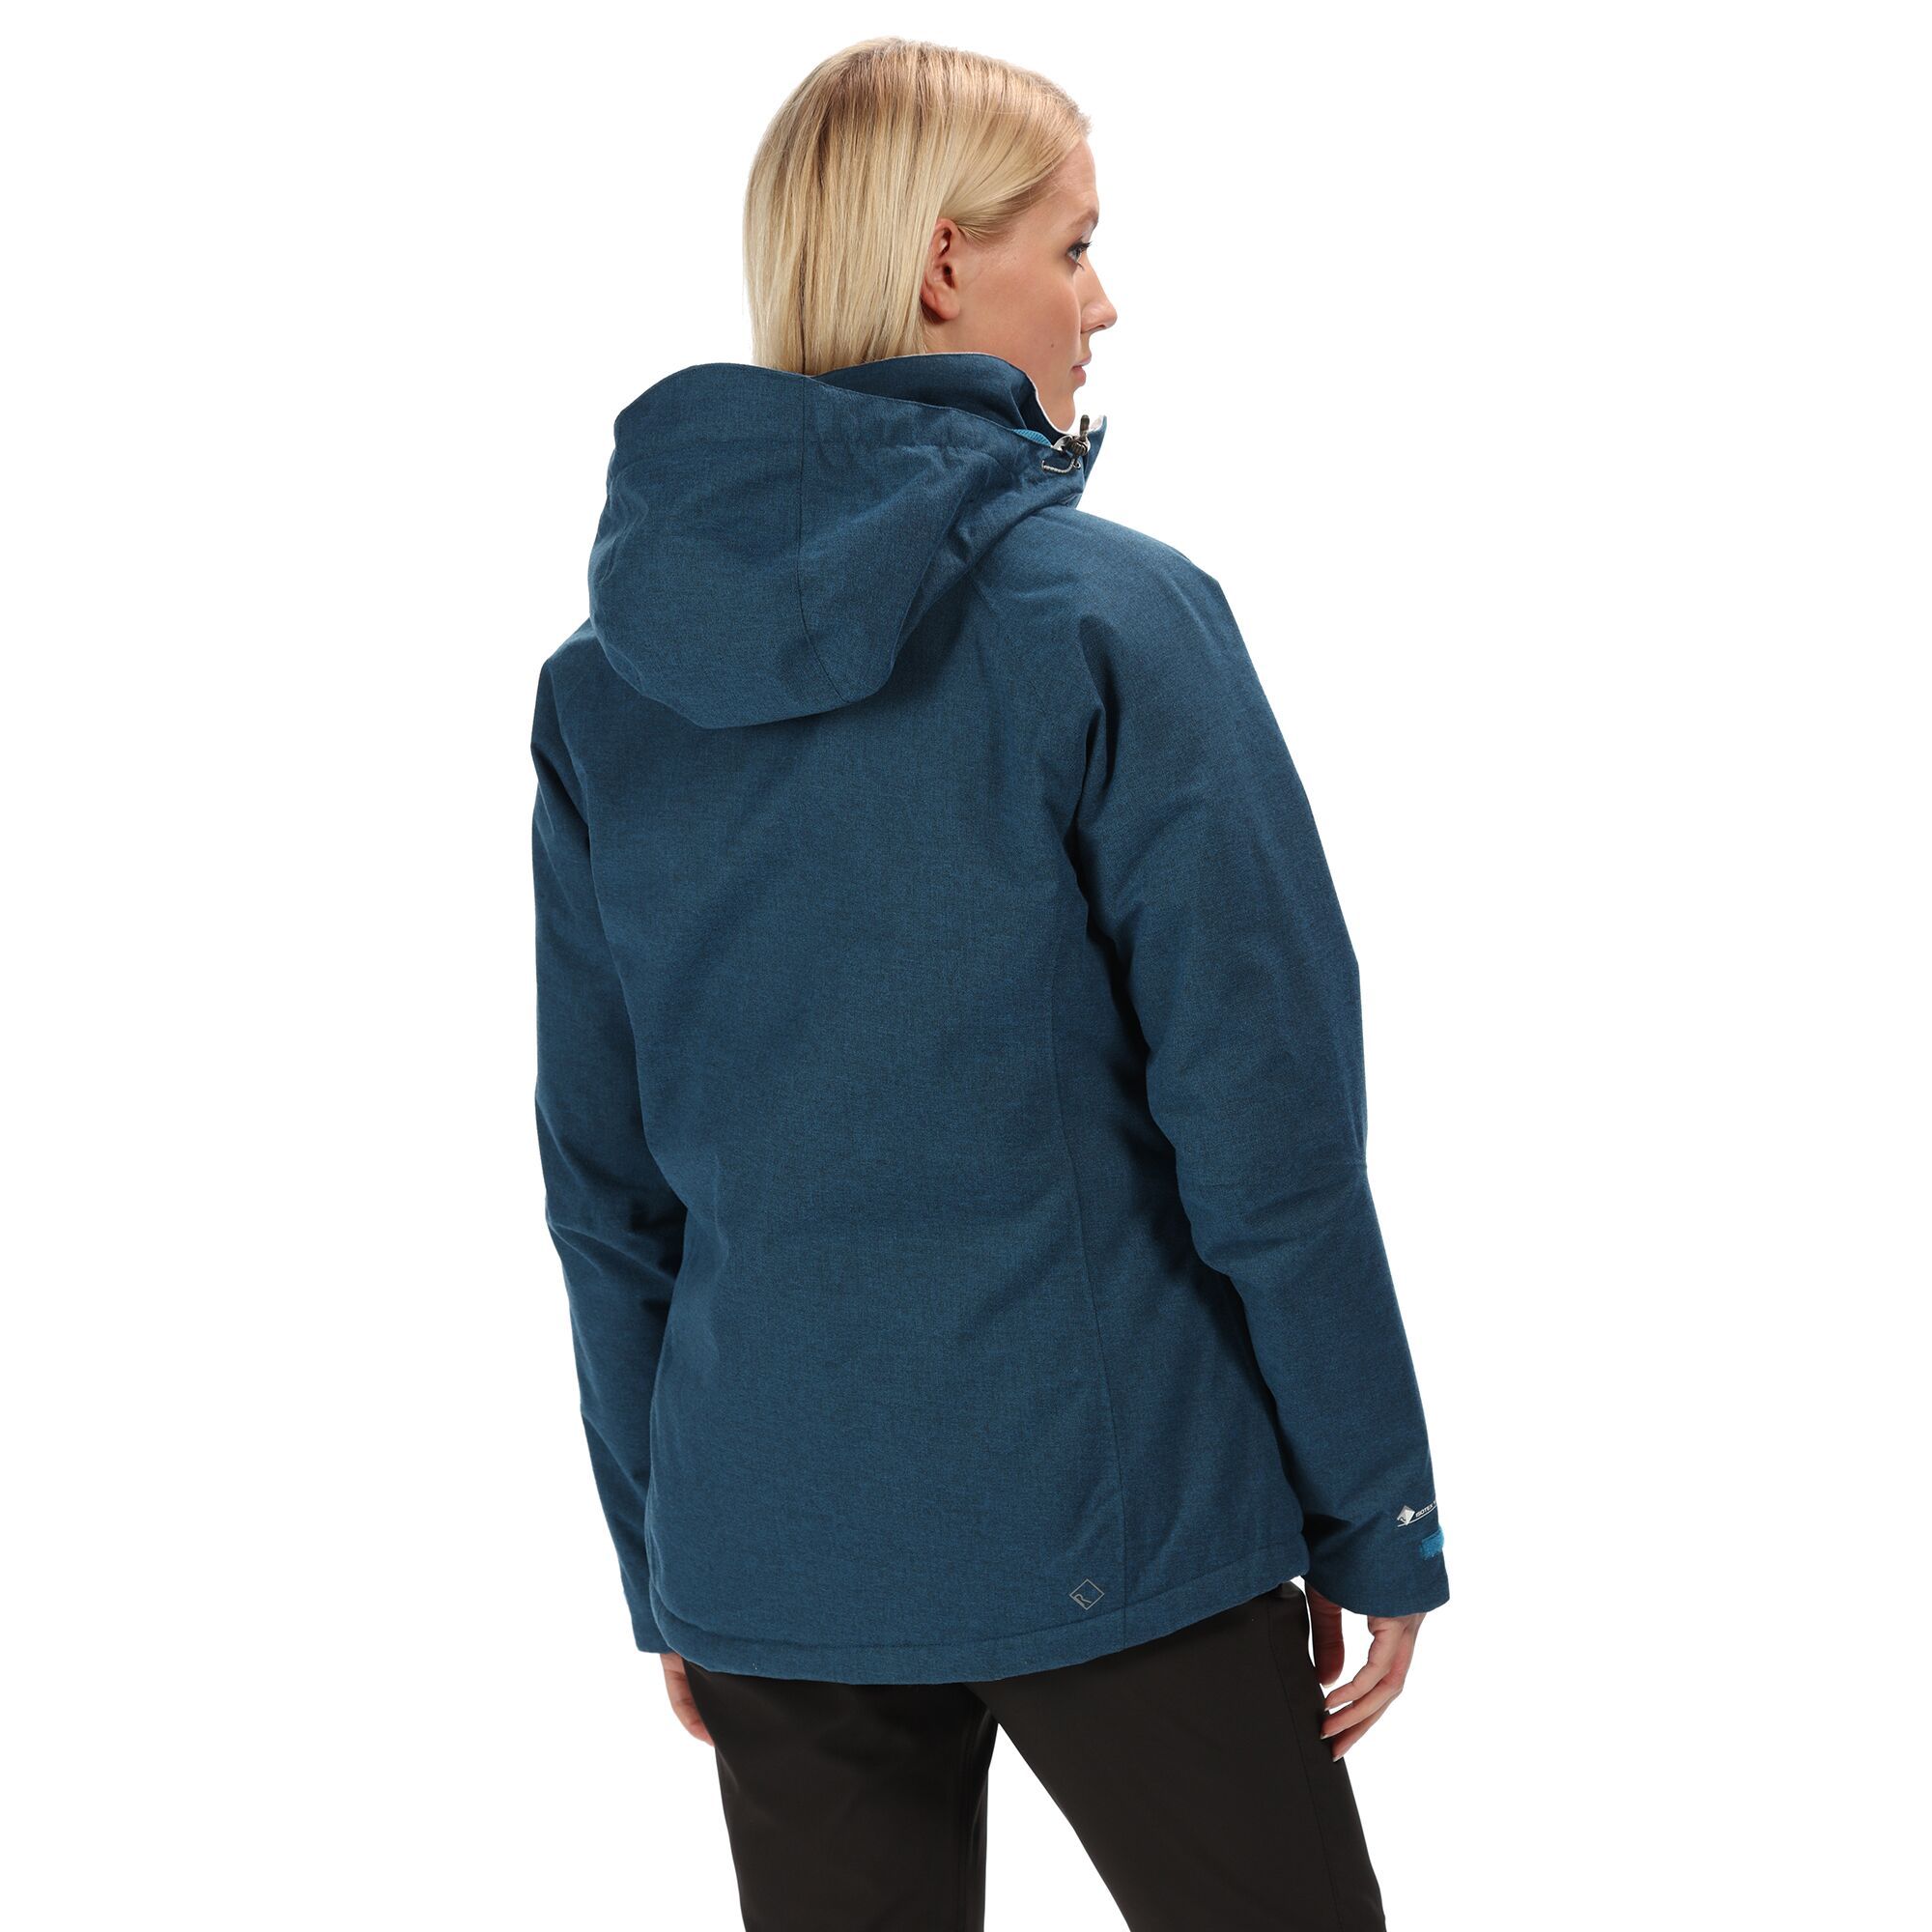 Made from Isotex 10,000 textured polyester fabric. Waterproof and breathable. Breathability rating 10,000g/m2/24hrs. Taped seam. Thermoguard insulation. Detachable technical hood with adjusters. 2 lower pockets with hi tech, water repellent zips and an inner zipped security pocket. Articulated sleeves for enhanced range of movement. Adjustable cuffs. Adjustable shockcord hem. Features a reinforcing stormflap and the Regatta Outdoors print on the chest. Size (chest): (6 UK) 30in, (8 UK) 32in, (10 UK) 34in, (12 UK) 36in, (14 UK) 38in, (16 UK) 40in, (18 UK) 43in, (20 UK) 45in, (22 UK) 48in, (24 UK) 50in, (28 UK) 54in, (30 UK) 56in, (32 UK) 58in, (34 UK) 60in, (36 UK) 62in.